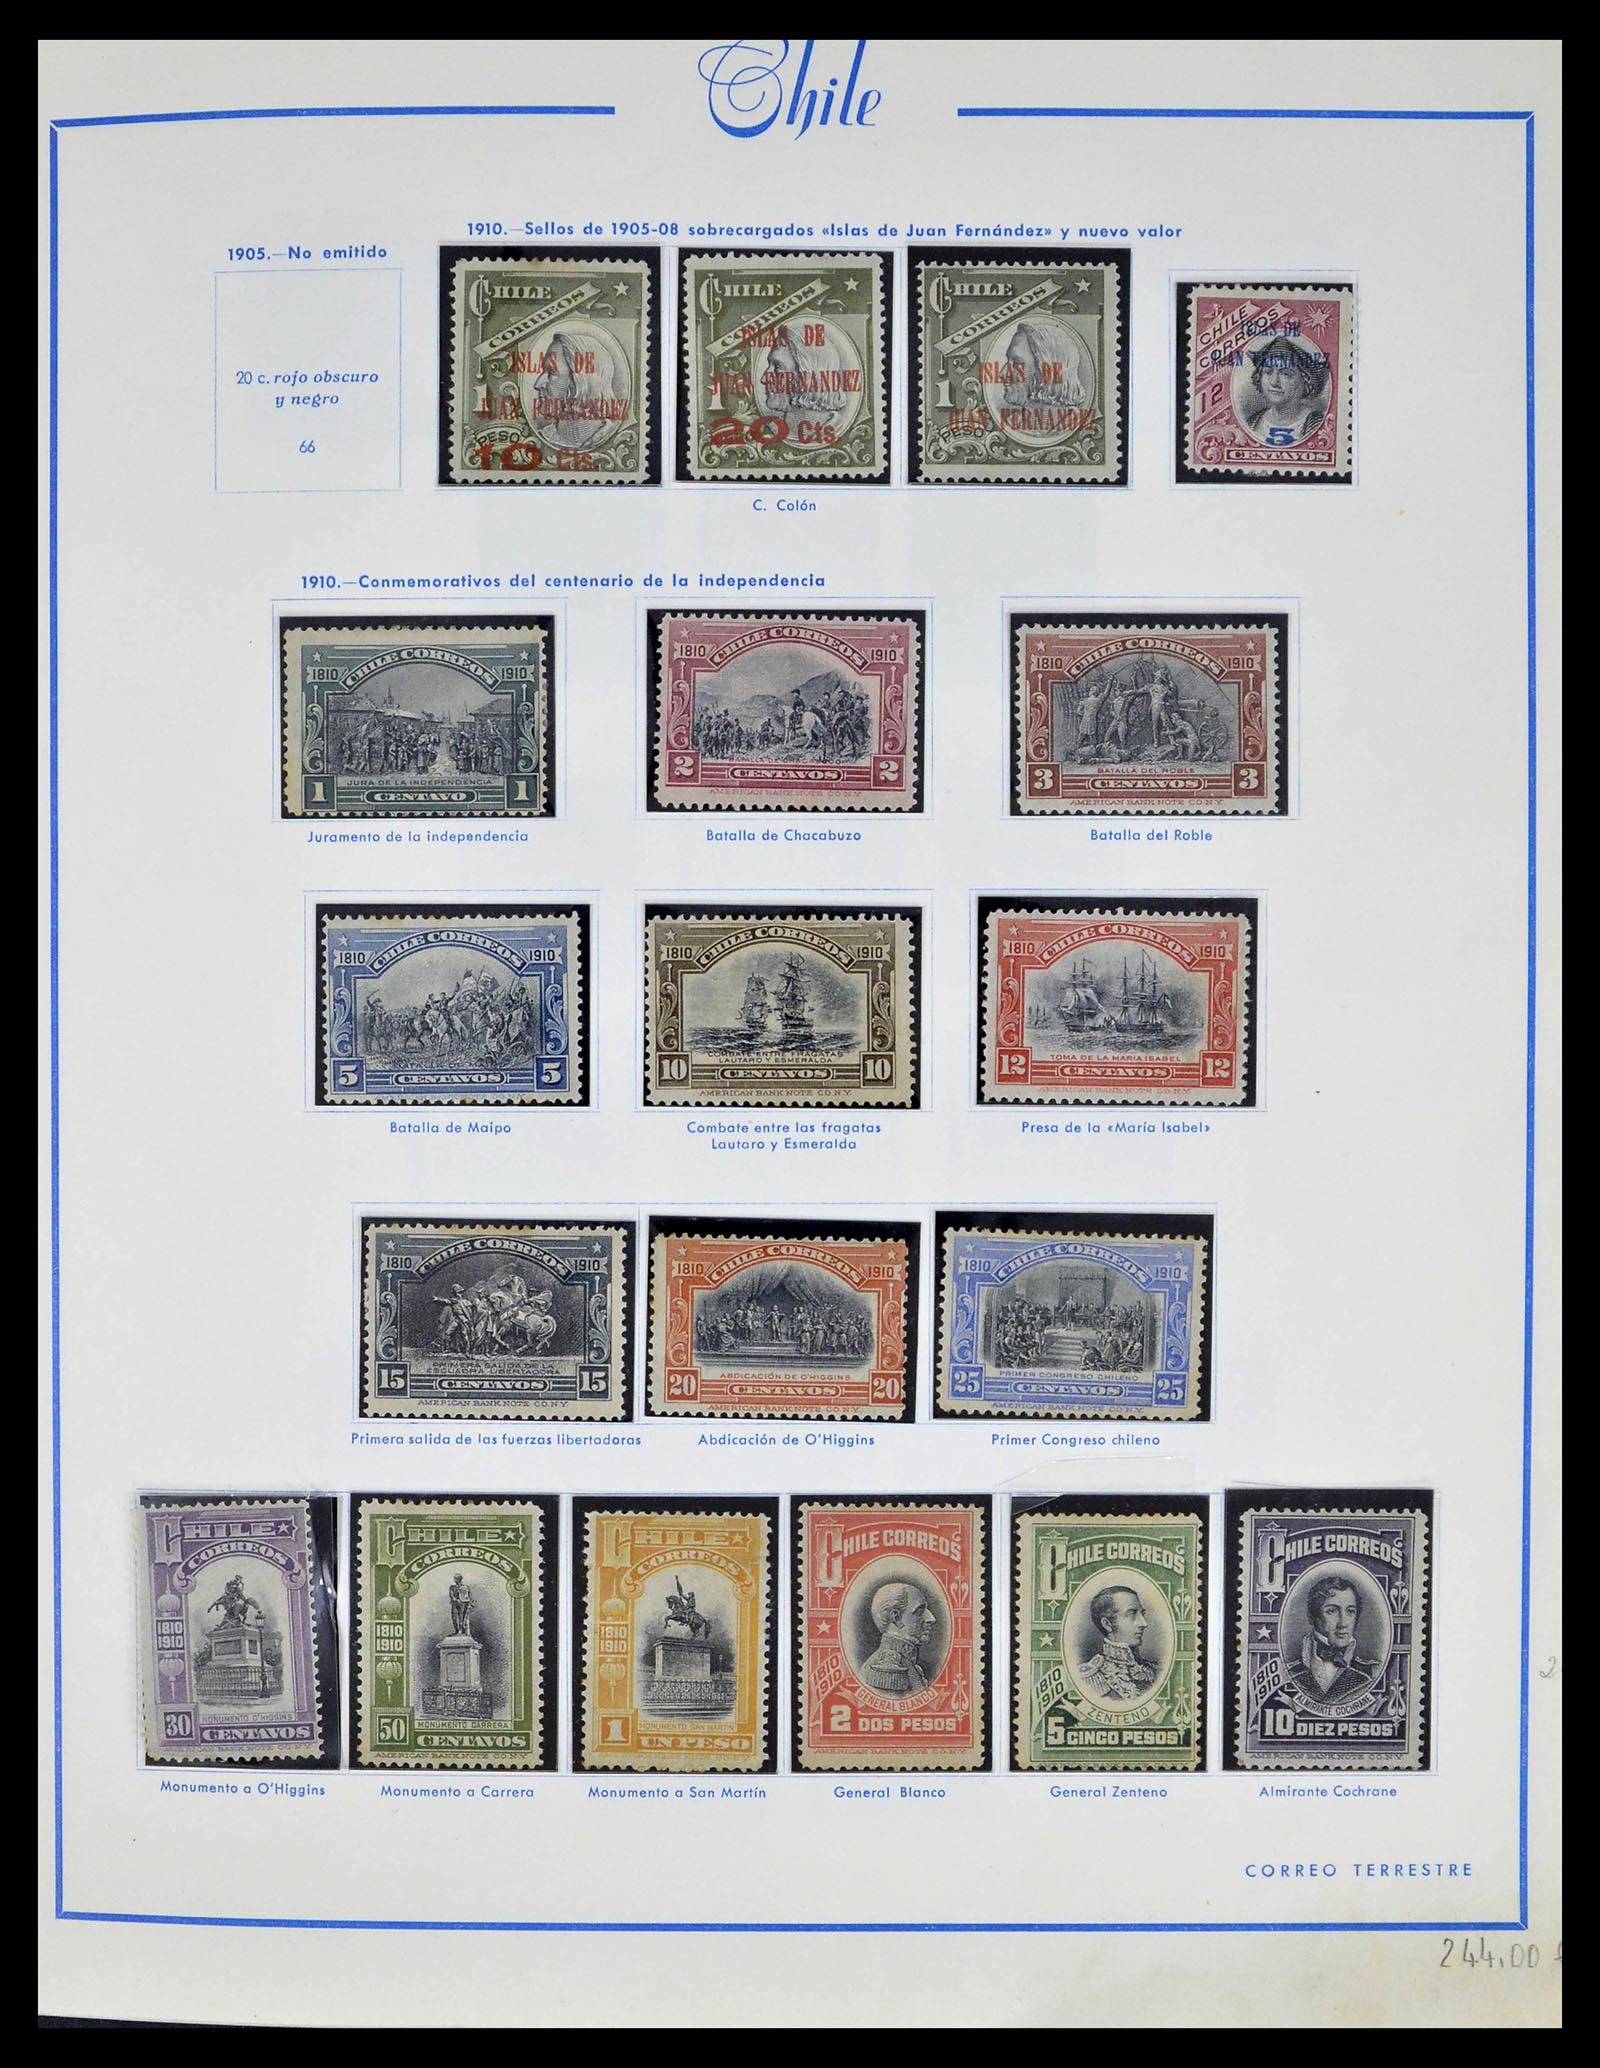 39213 0006 - Stamp collection 39213 Chile 1853-1970.